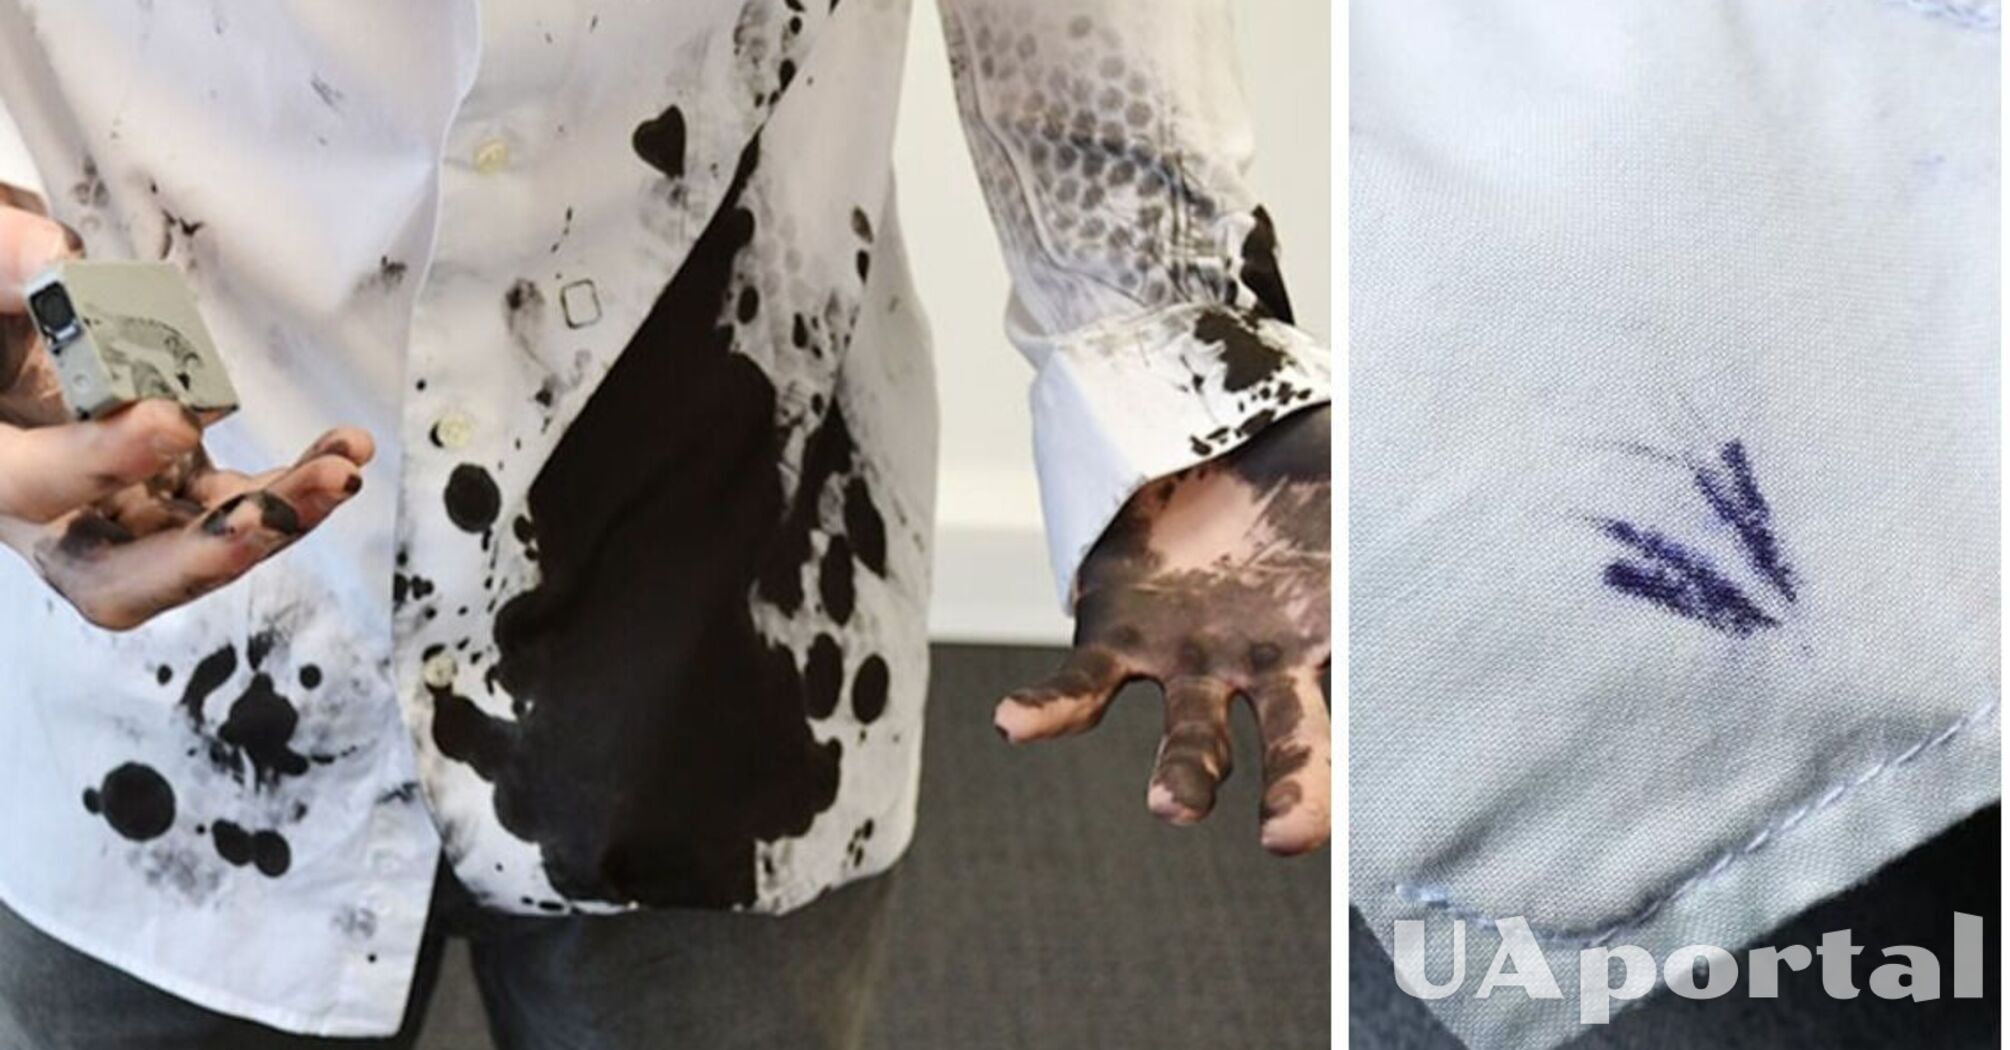 It even removes ink stains: How to easily remove stubborn stains from clothes